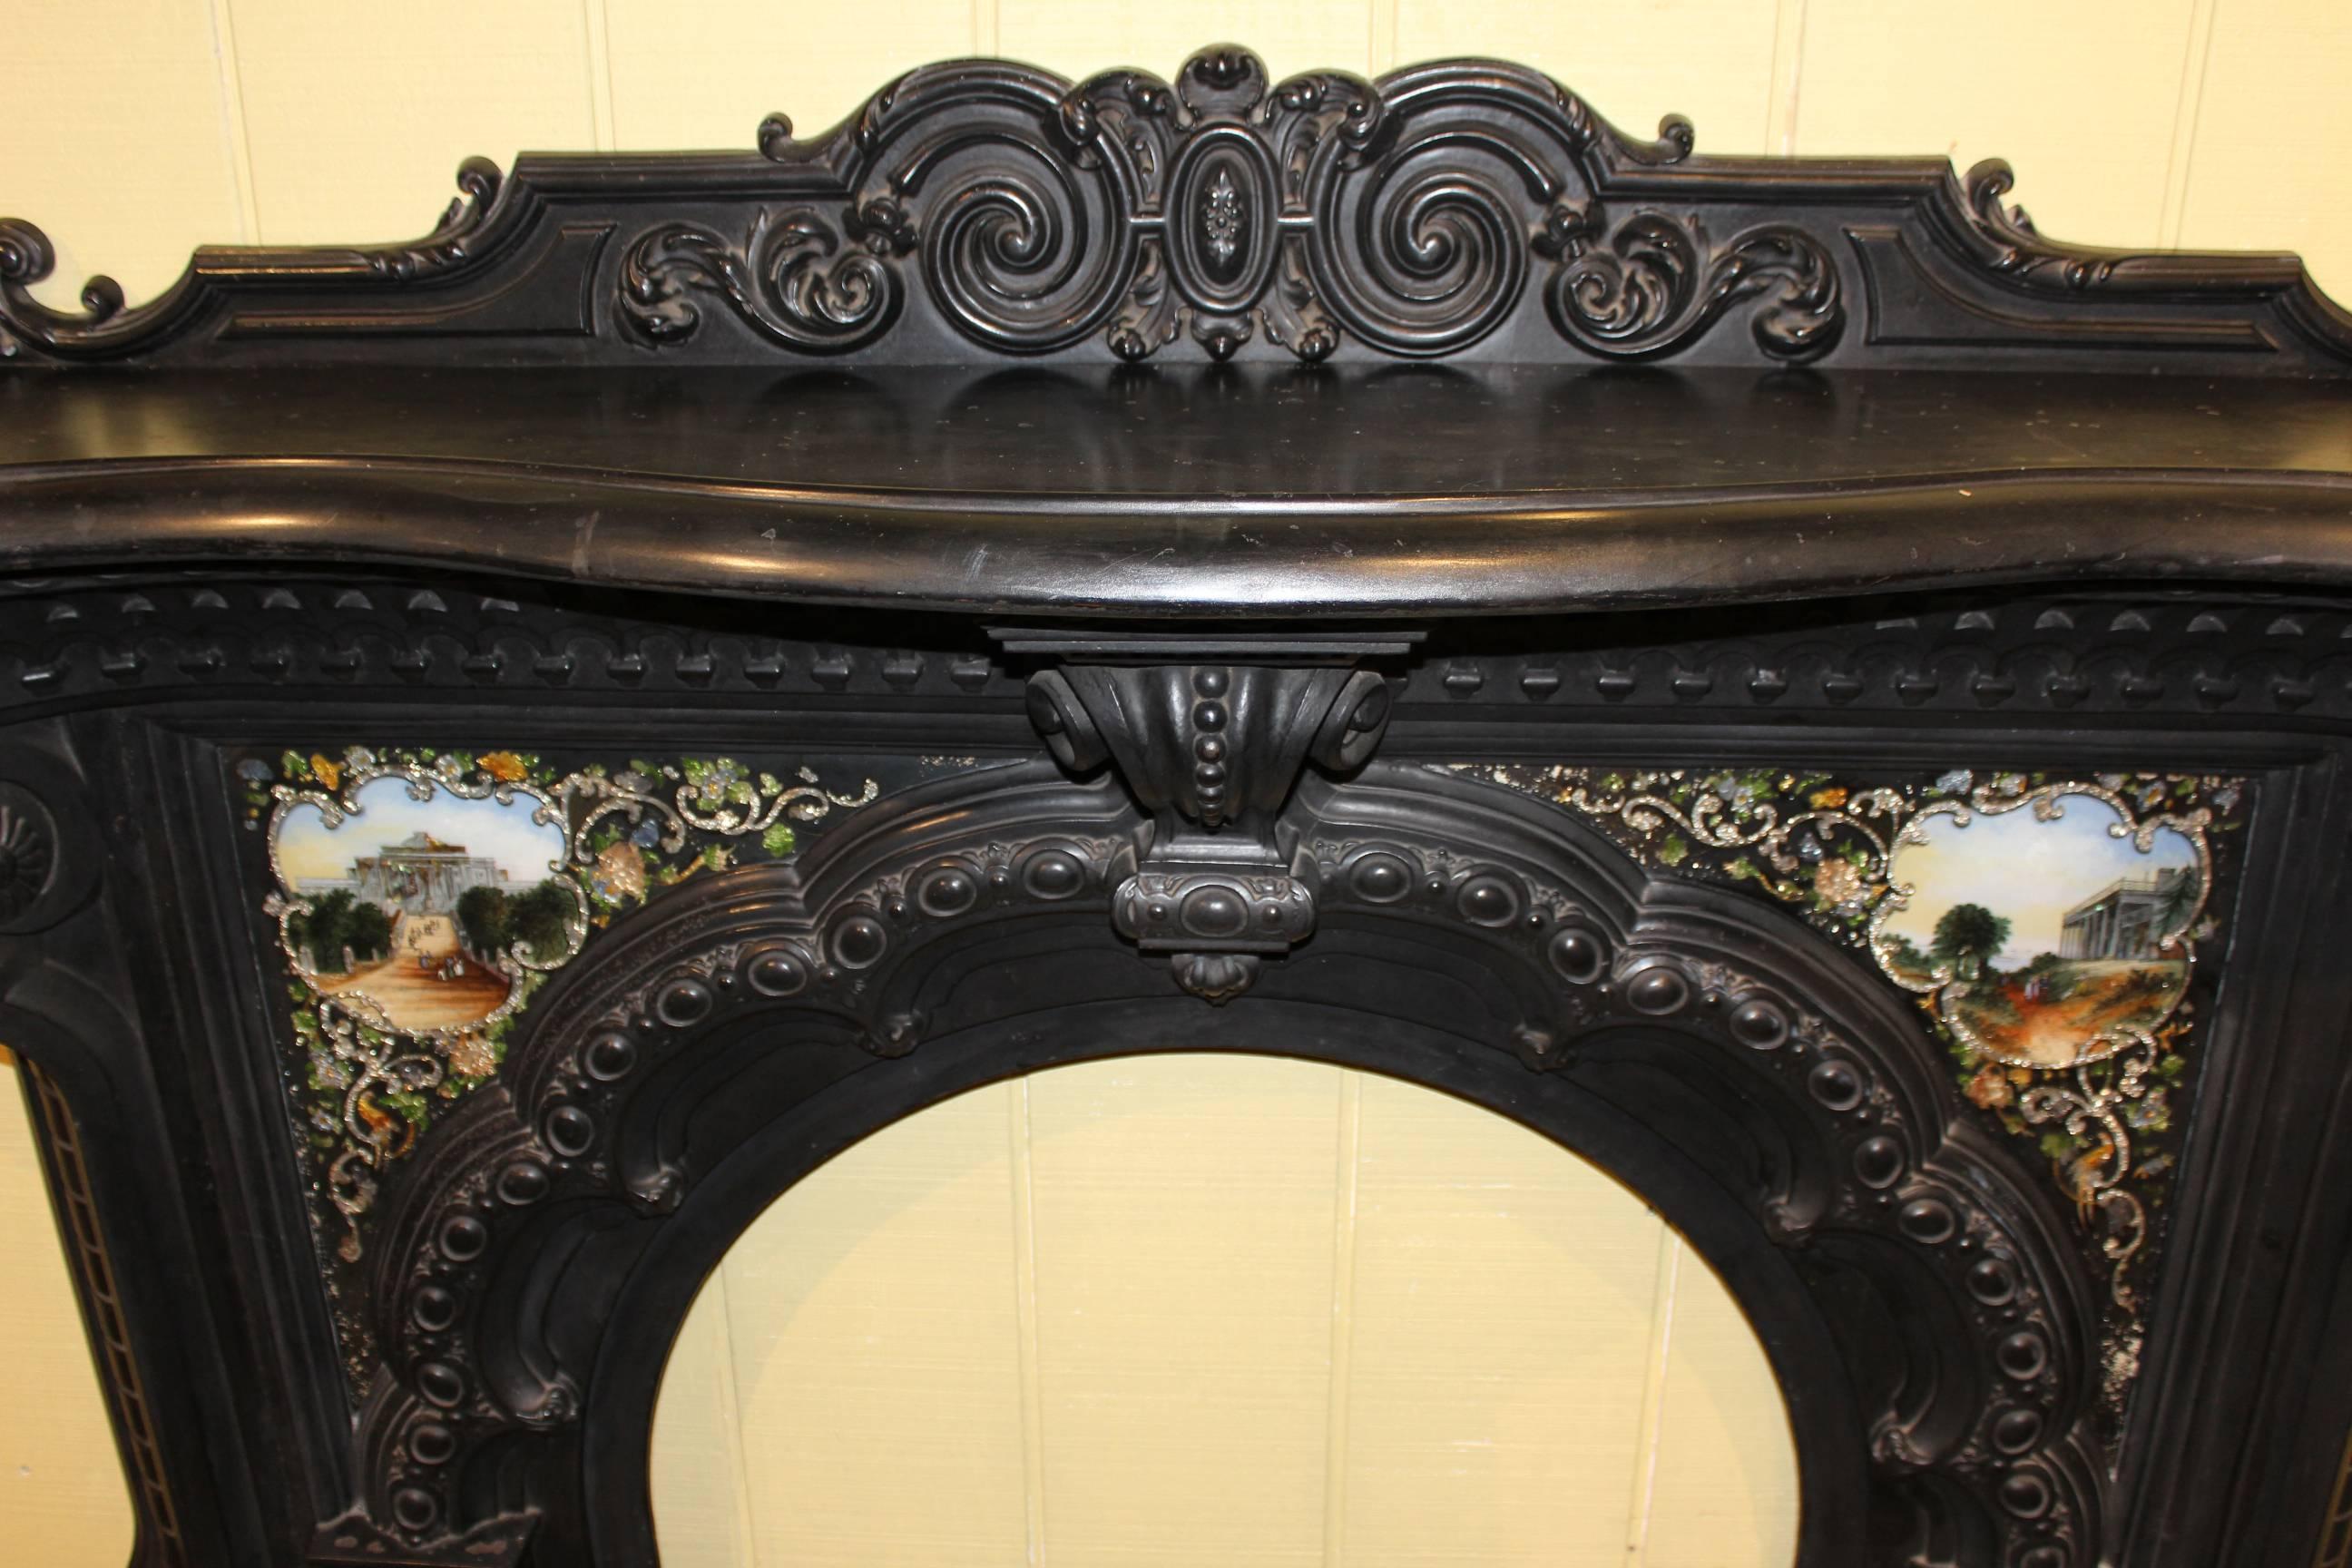 An exceptional cast iron fireplace serpentine form mantel and surround, circa 1850-1860, with original inset églomisé glass panels depicting buildings and figures, attached Rococo backsplash, central arched interior opening, and large scrolled